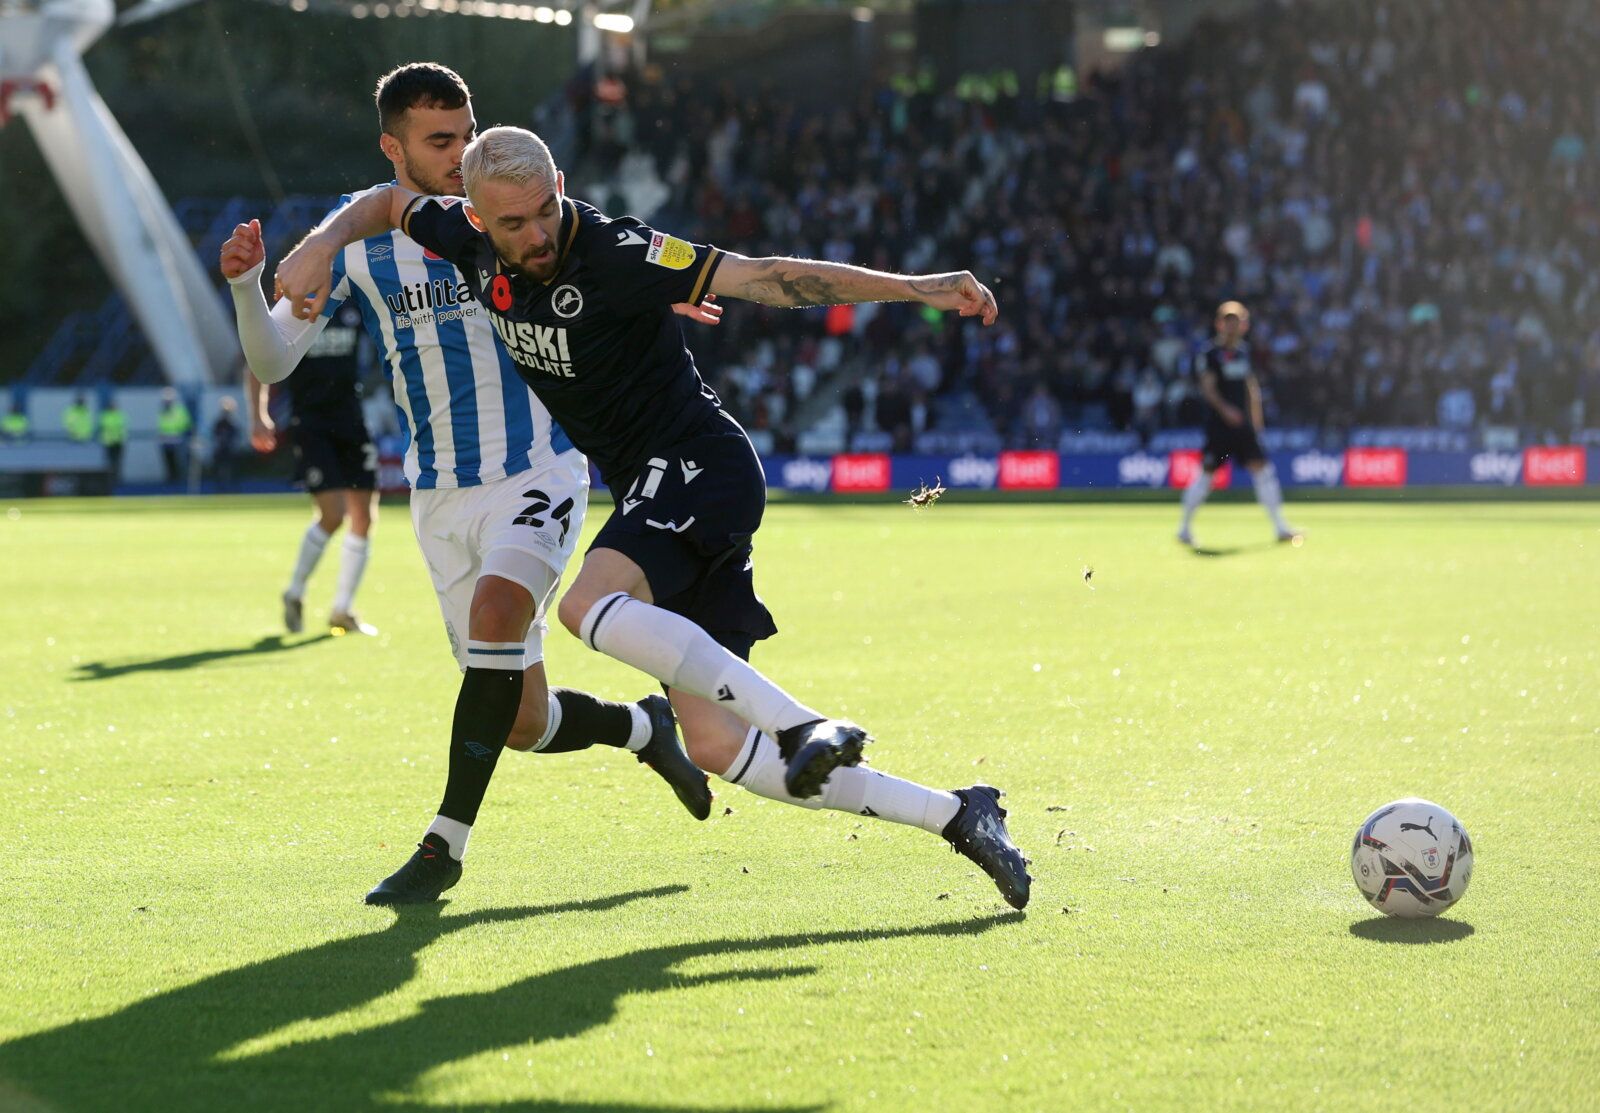 Soccer Football - Championship - Huddersfield Town v Millwall - John Smith's Stadium, Huddersfield, Britain - October 30, 2021 Millwall's Scott Malone in action with Huddersfield Town's Danel Sinani  Action Images/John Clifton  EDITORIAL USE ONLY. No use with unauthorized audio, video, data, fixture lists, club/league logos or 